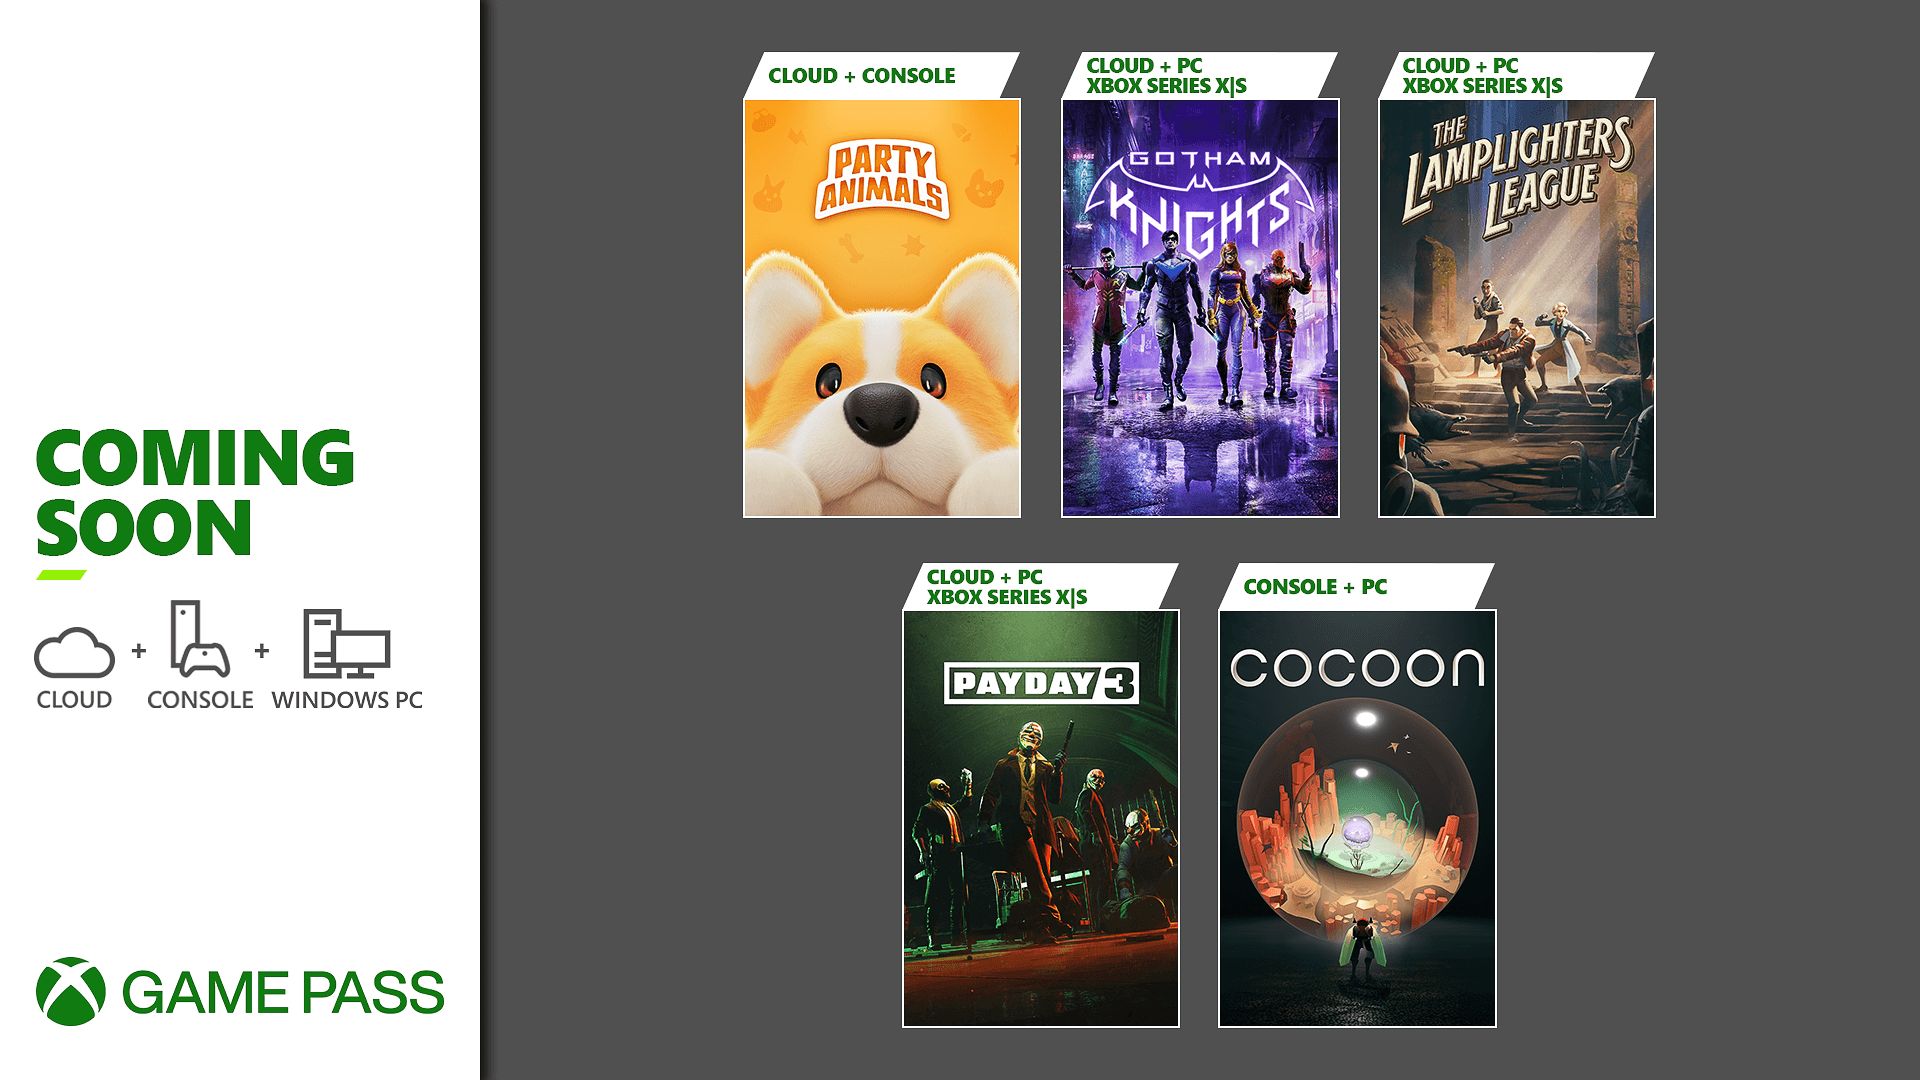 Coming to Xbox Game Pass: Gungrave G.O.R.E, Warhammer 40,000: Darktide,  Dune: Spice Wars, and More - Xbox Wire